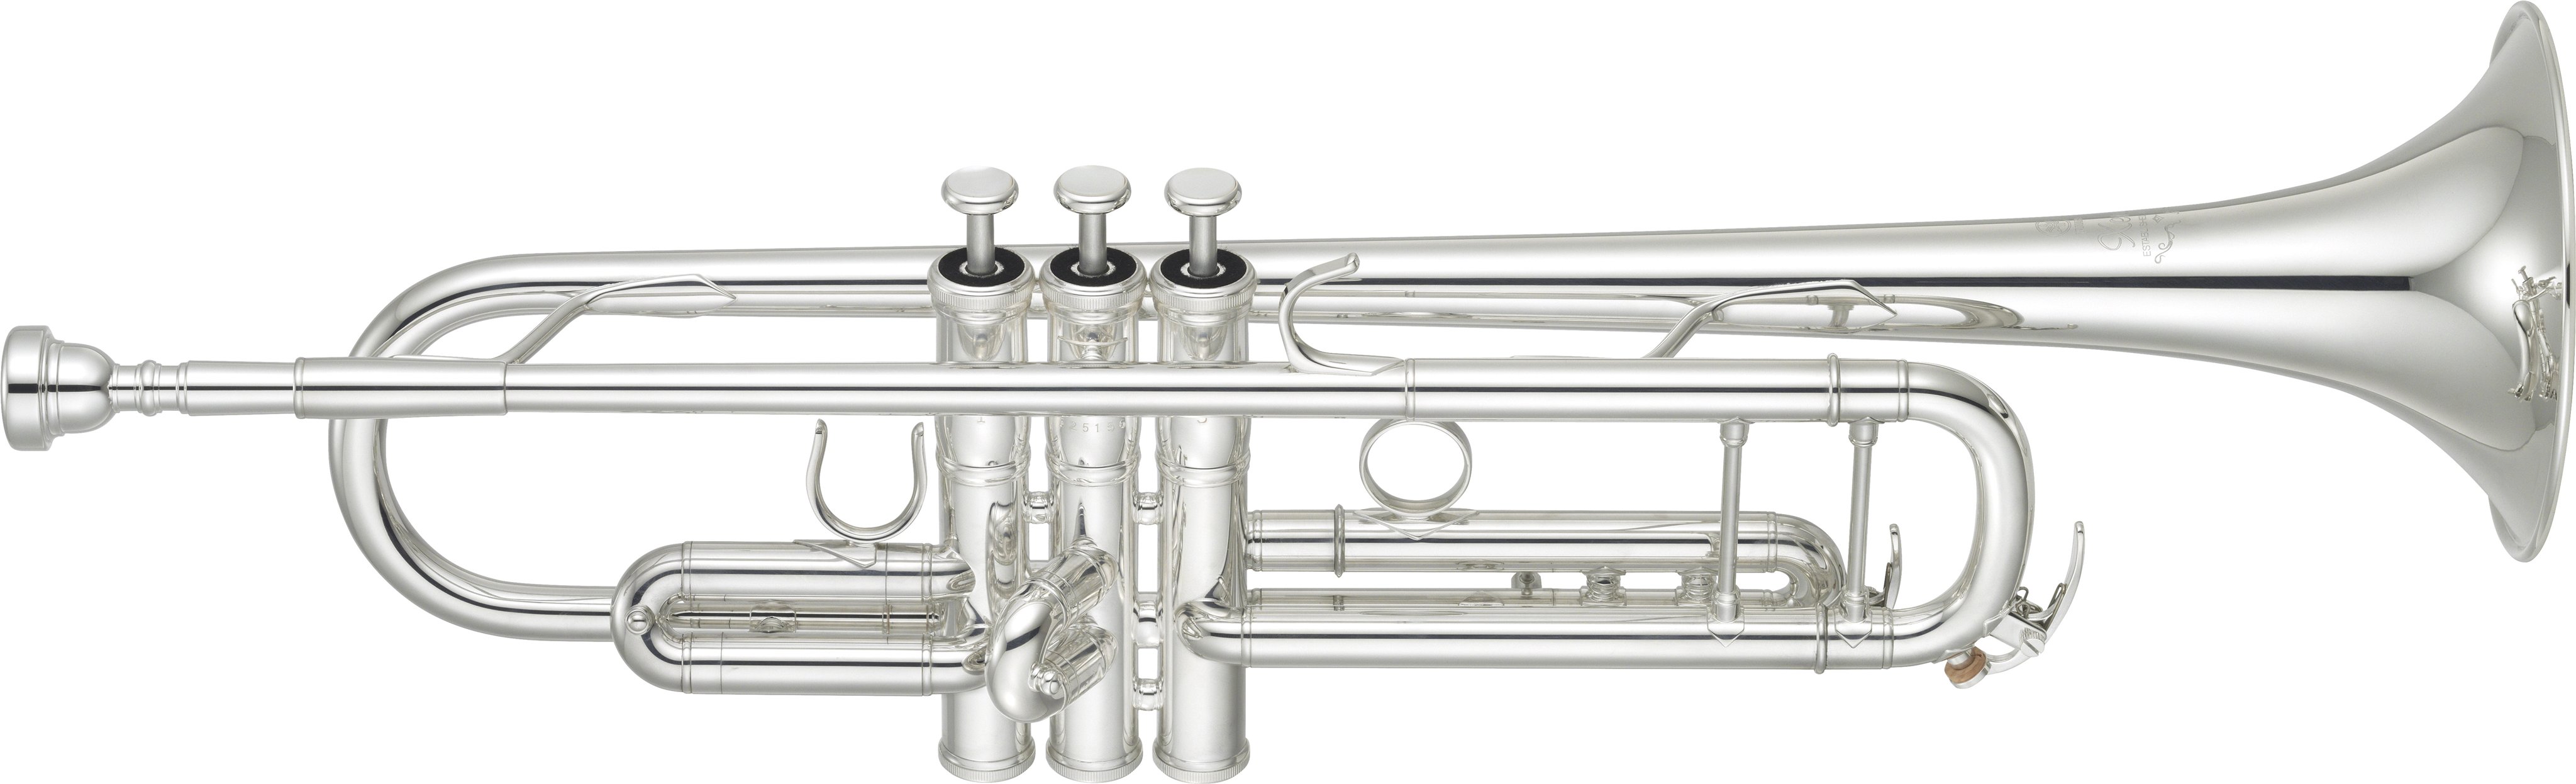 YTR-8335II - Overview - Bb Trumpets - Trumpets - Brass & Woodwinds 